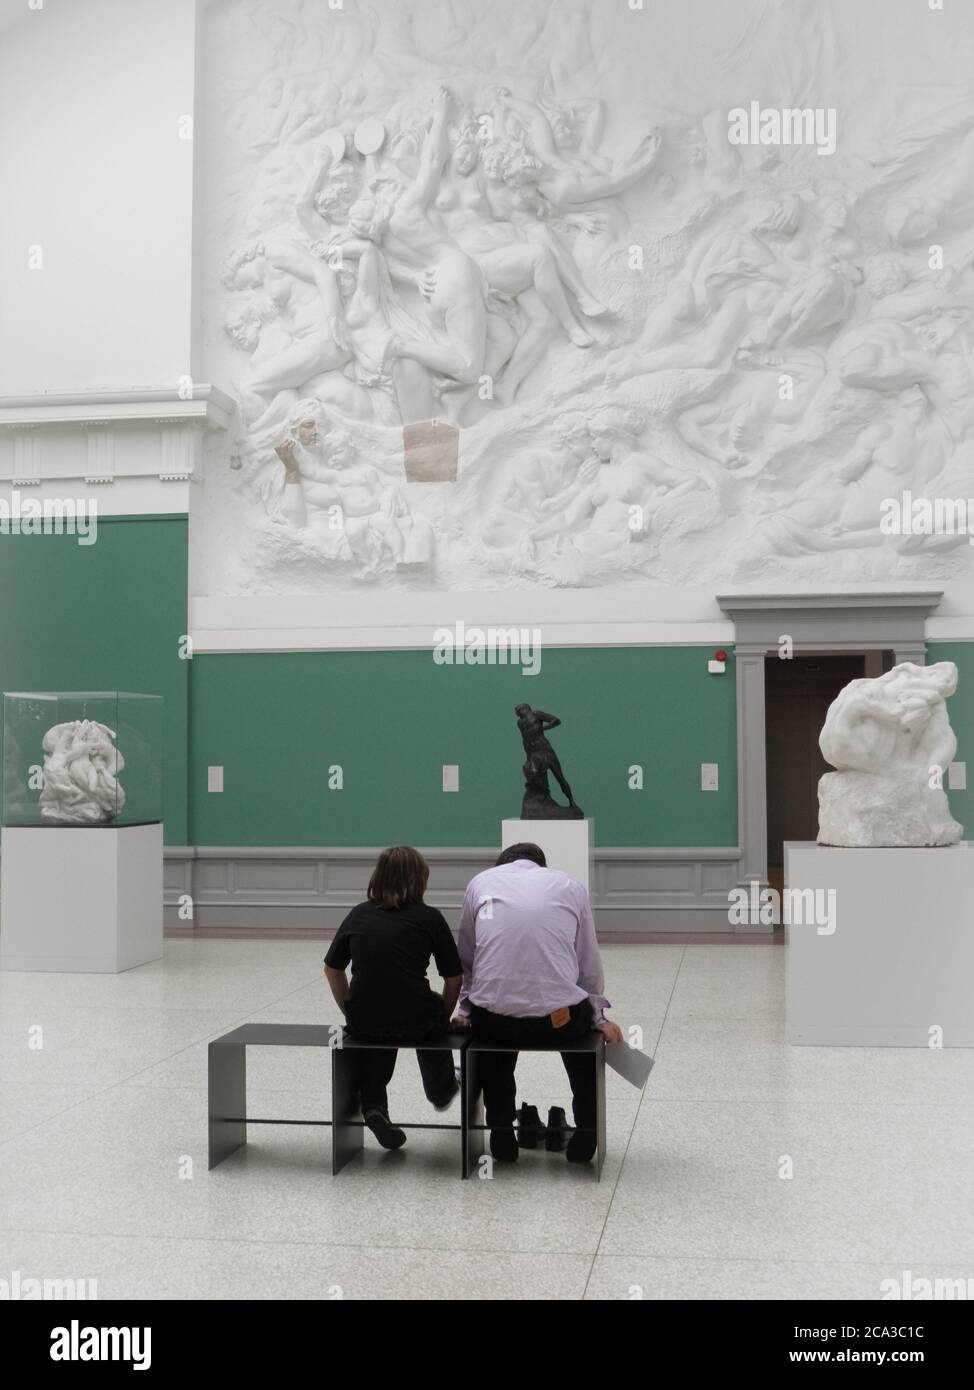 Boots off and swinging feet as two people look at a tumultuous frieze with patched hand and face elements, Antwerp, Belguim. Stock Photo